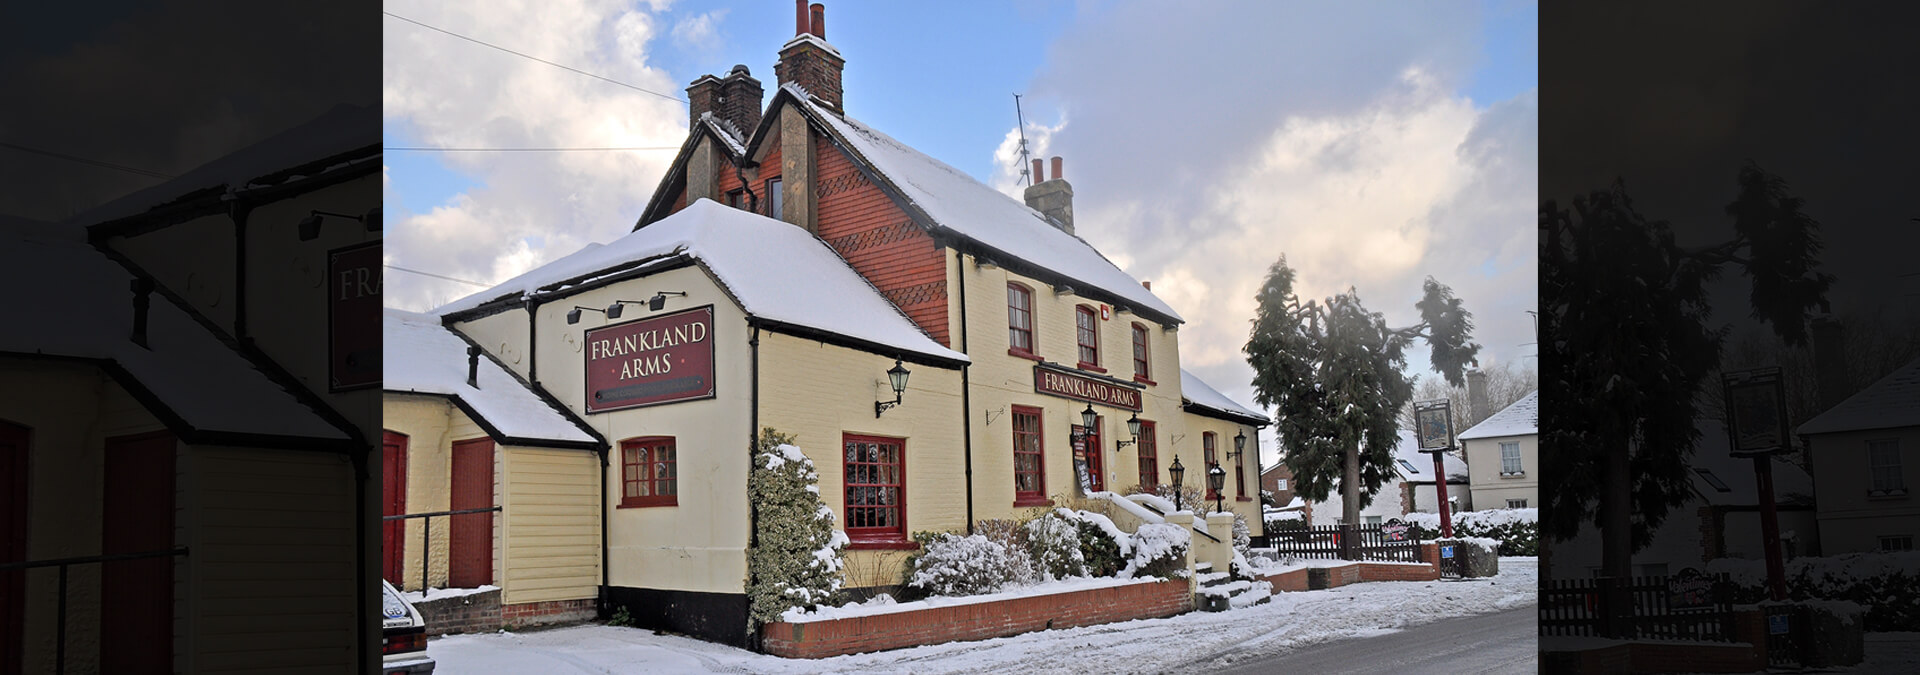 The Frankland Arms